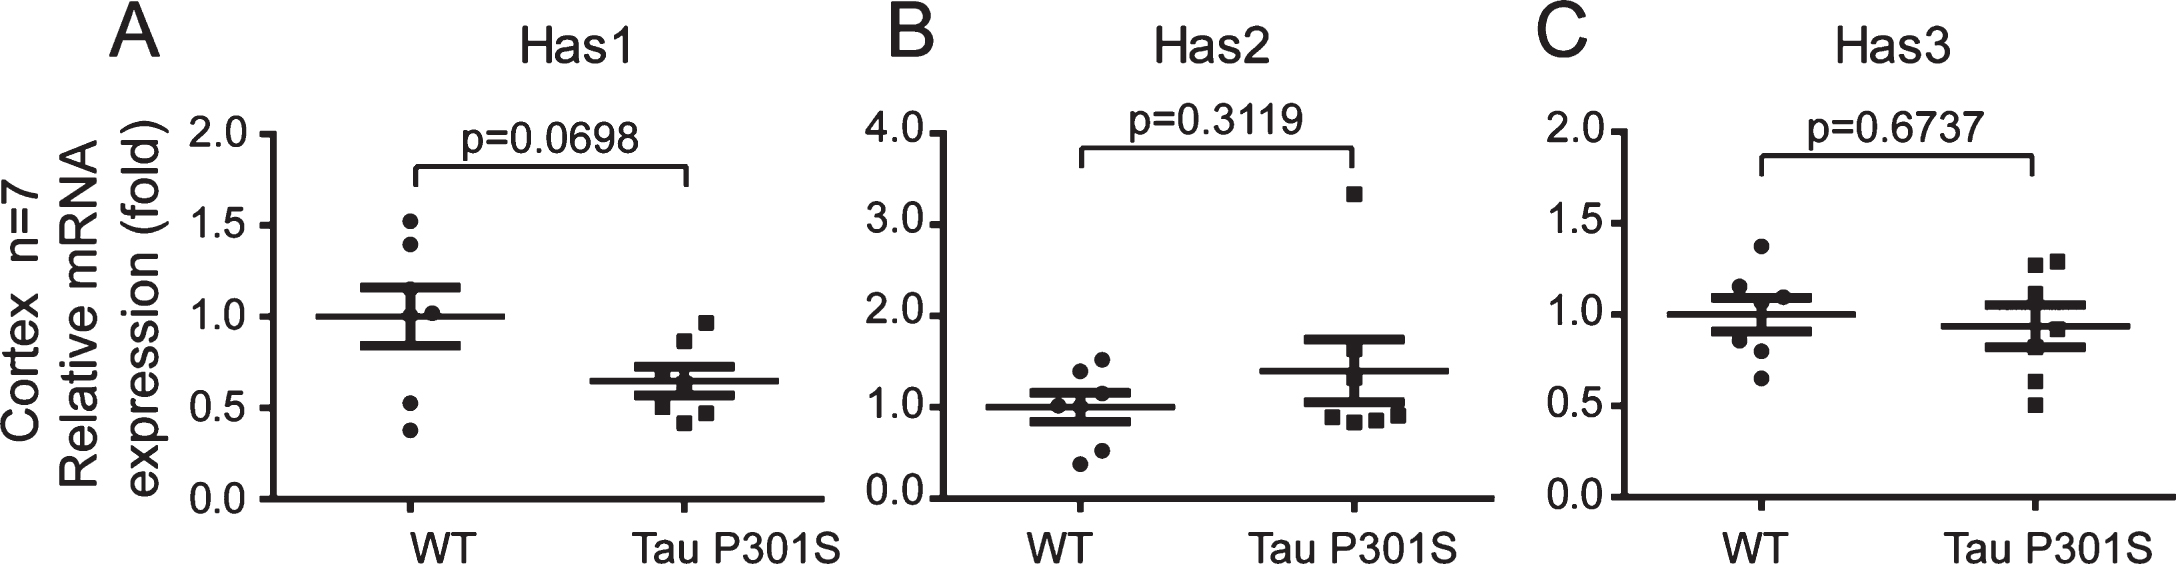 The expression of TauP301S did not affect the expressions of the HAS mRNAs in the cortex (10-month-old). Quantitative real-time PCR data showing the mRNA expression levels of Has1 (A), Has2 (B), and Has3 (C) in the cortex of the TauP301S Tg mice and control mice. The data are provided as the relative fold changes from the normal control. Data are represented as means±se.; n = 7 mice per group. The p values were calculated using unpaired t-tests (A-C).